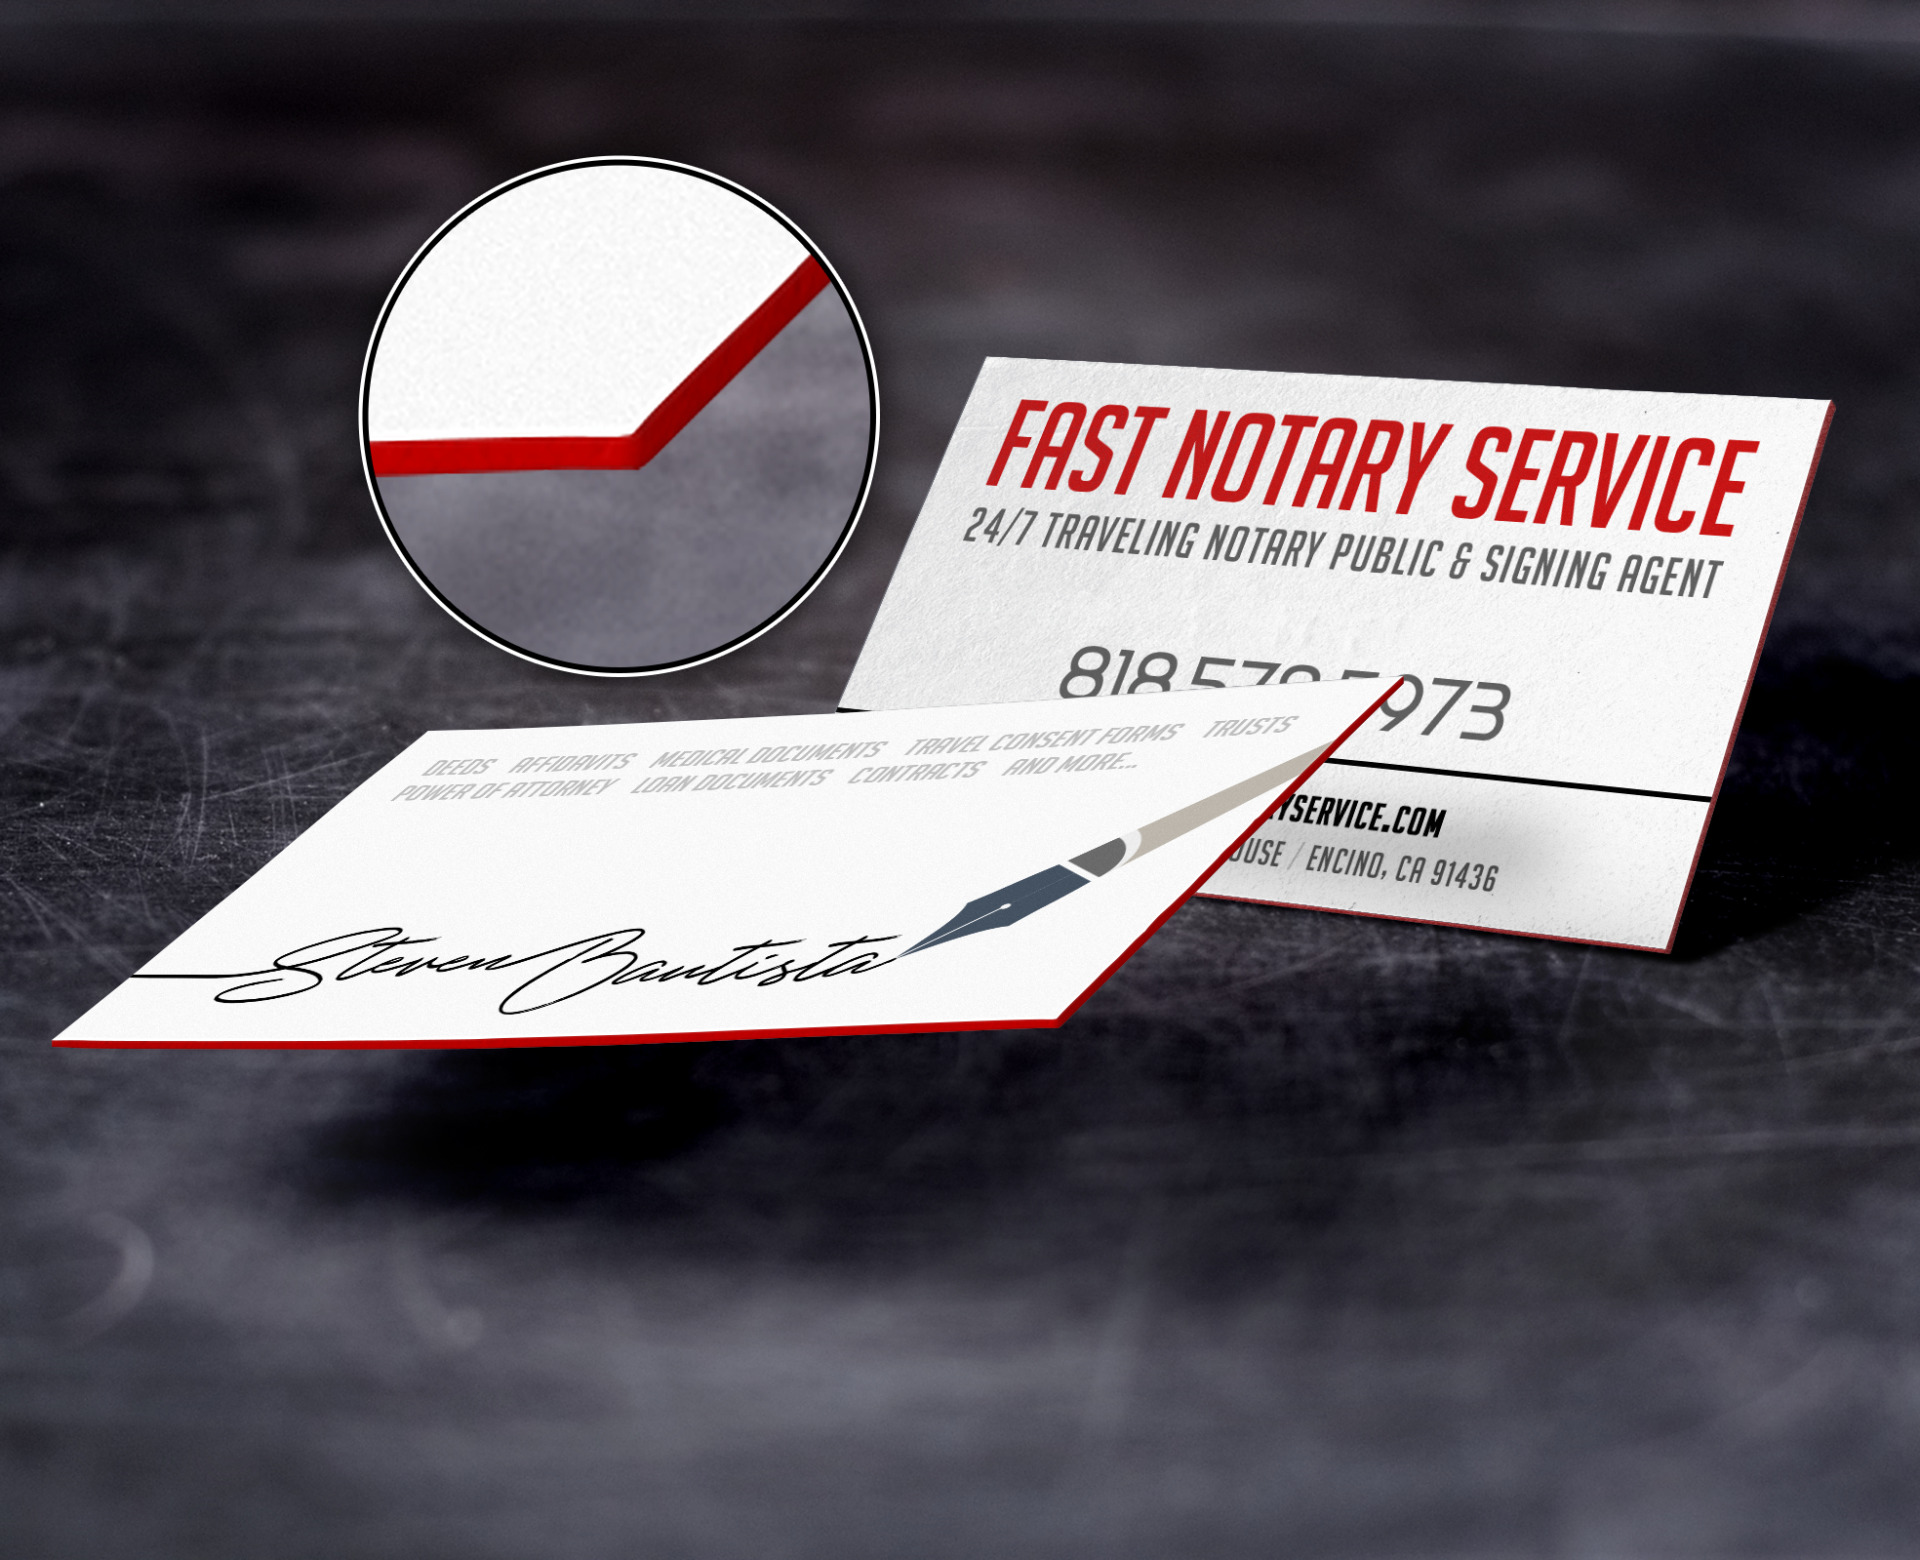 Fast Notary Service - Business Cards